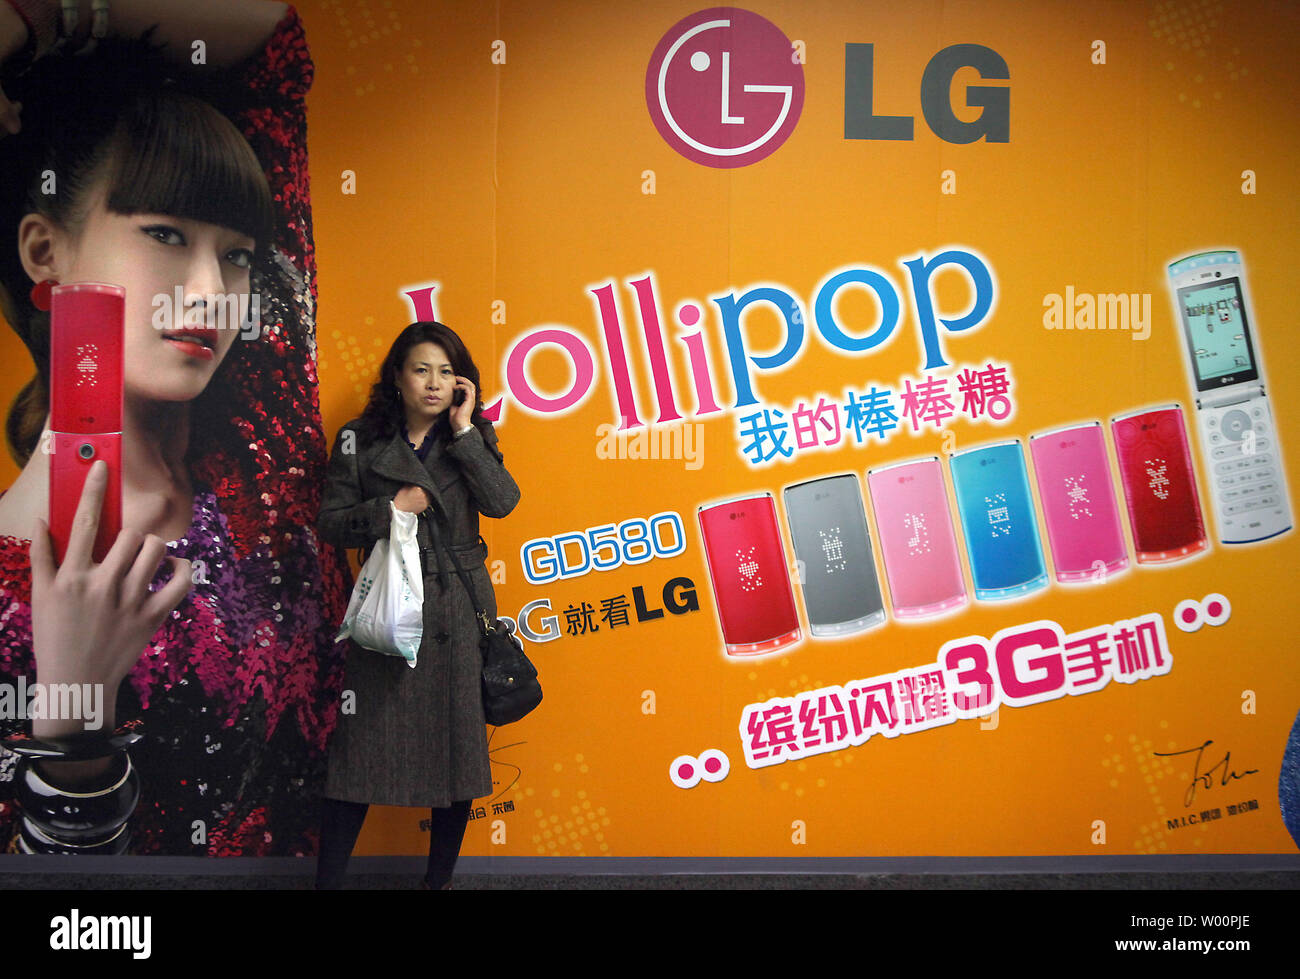 A Chinese woman talks on her mobile phone in front of a large advertisement for a new series of phones in Beijing on March 30, 2010.  China stands now as the biggest market of mobile phone sales in the world.    UPI/Stephen Shaver Stock Photo